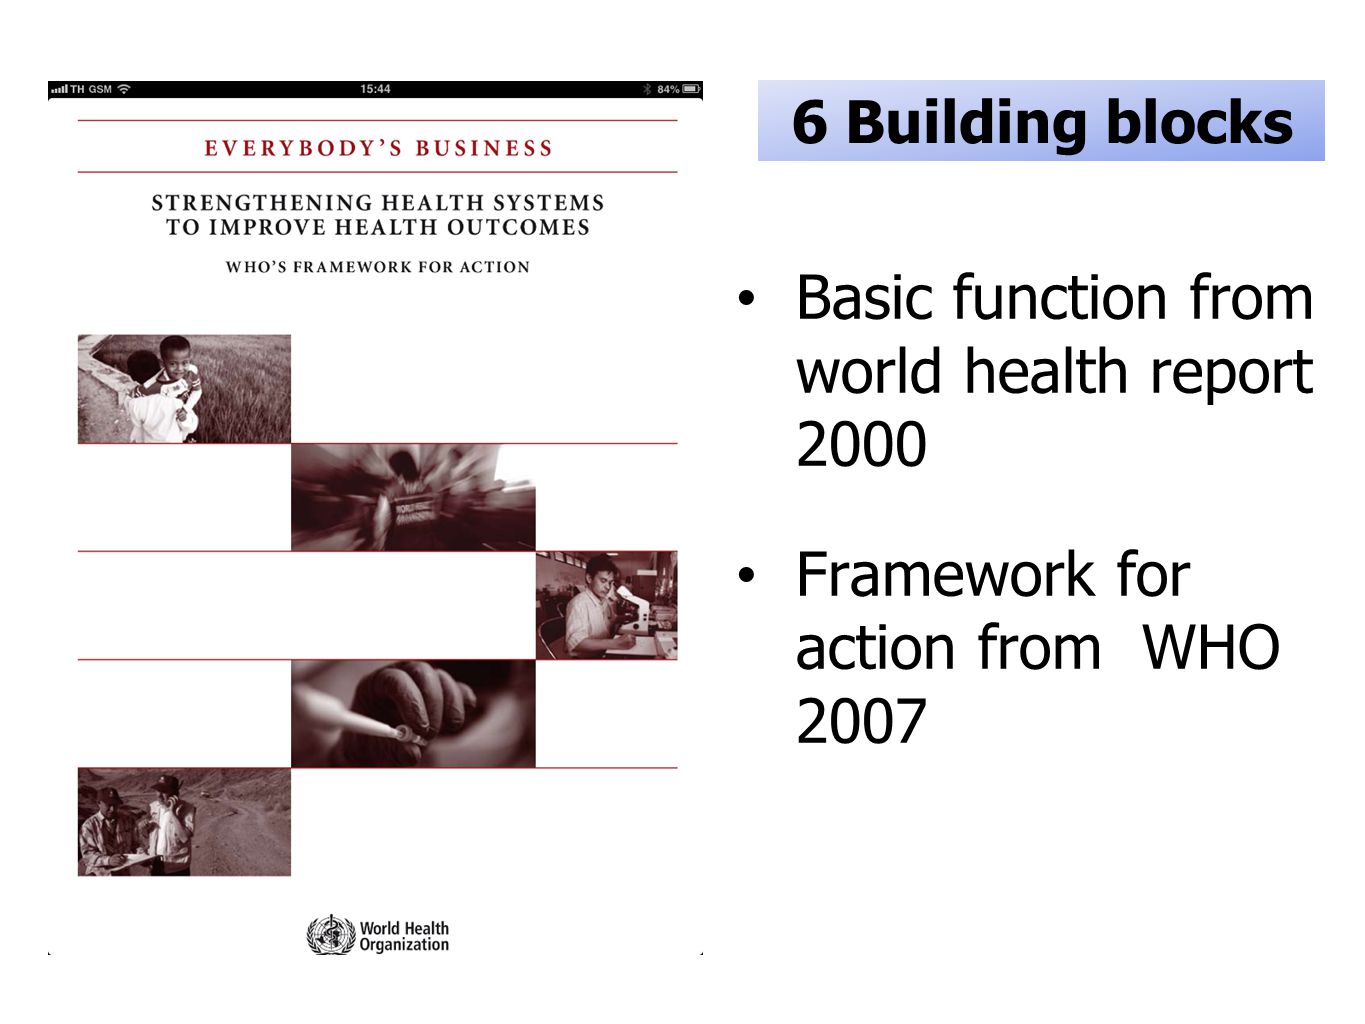 Basic function from world health report 2000